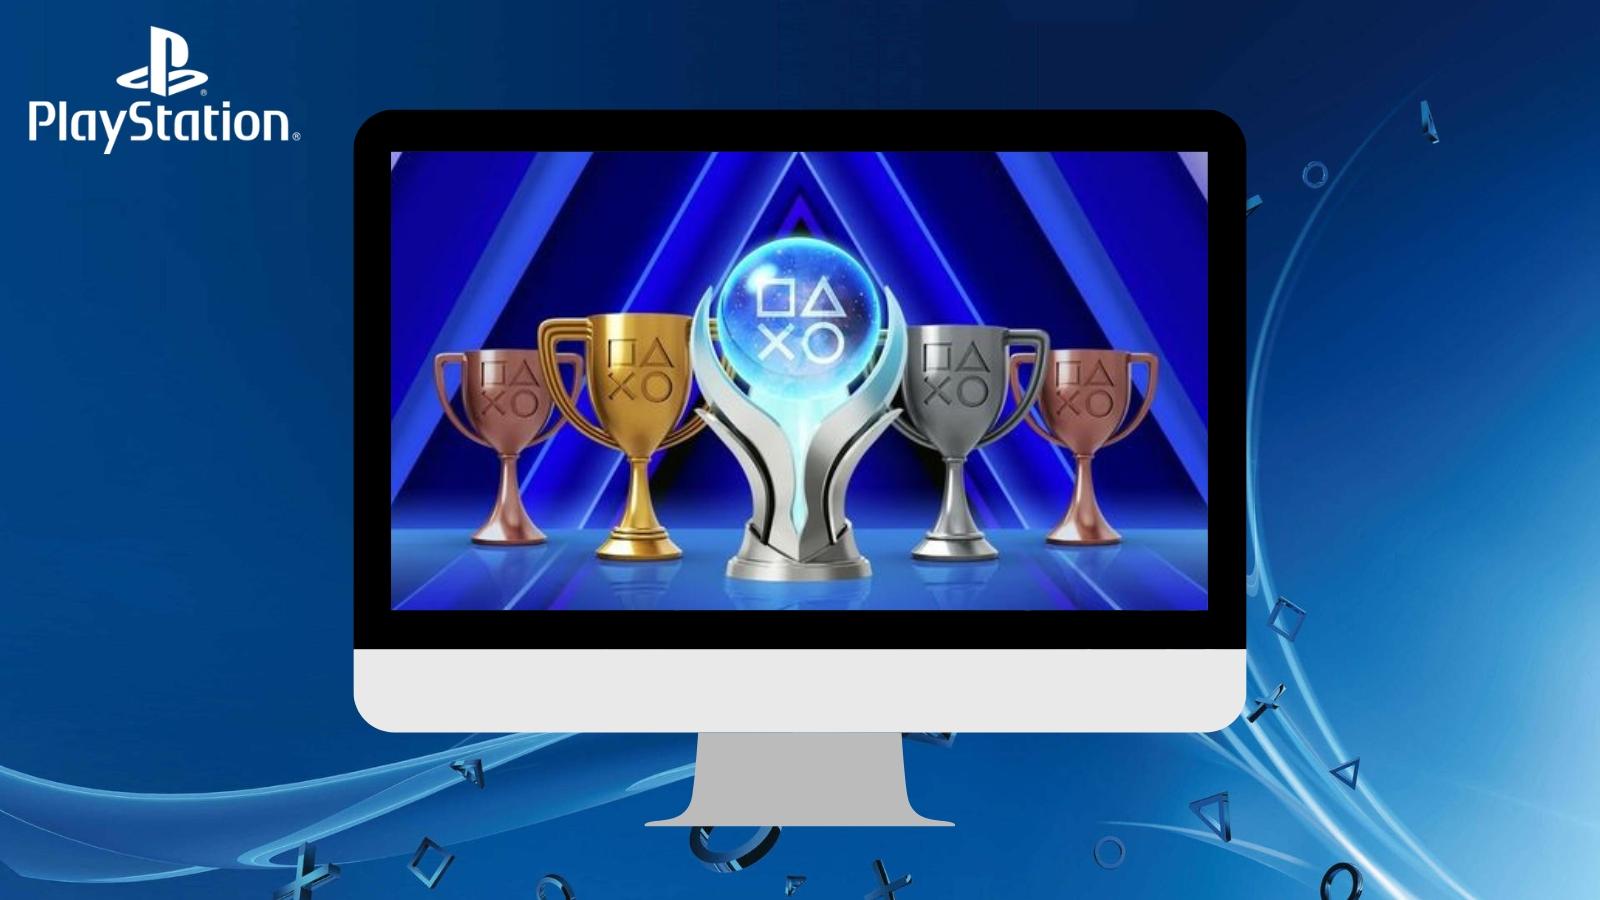 PlayStation trophy cover on PC